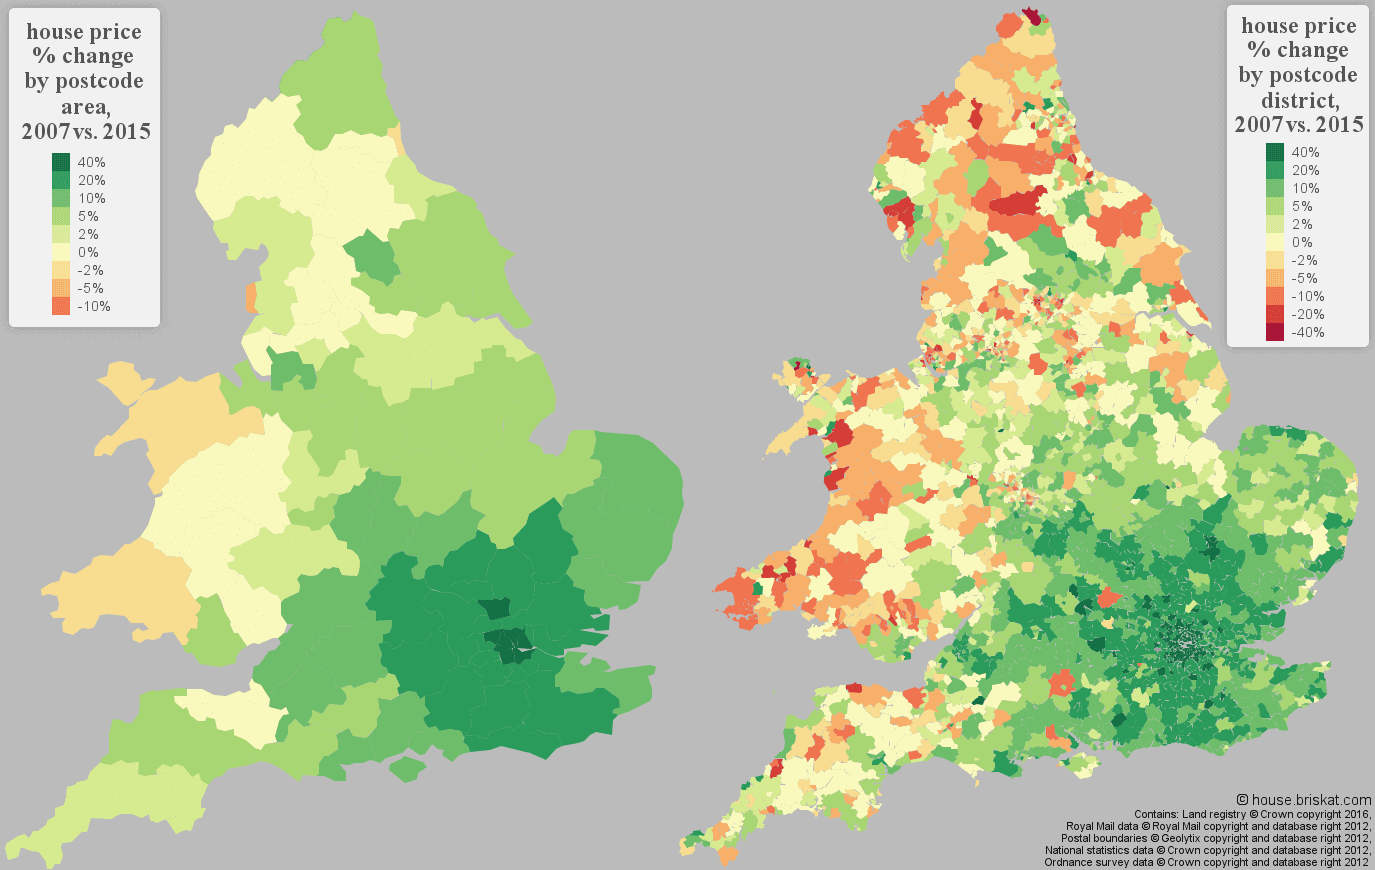 Heat map of England house prices growth 2007 compared to 2015